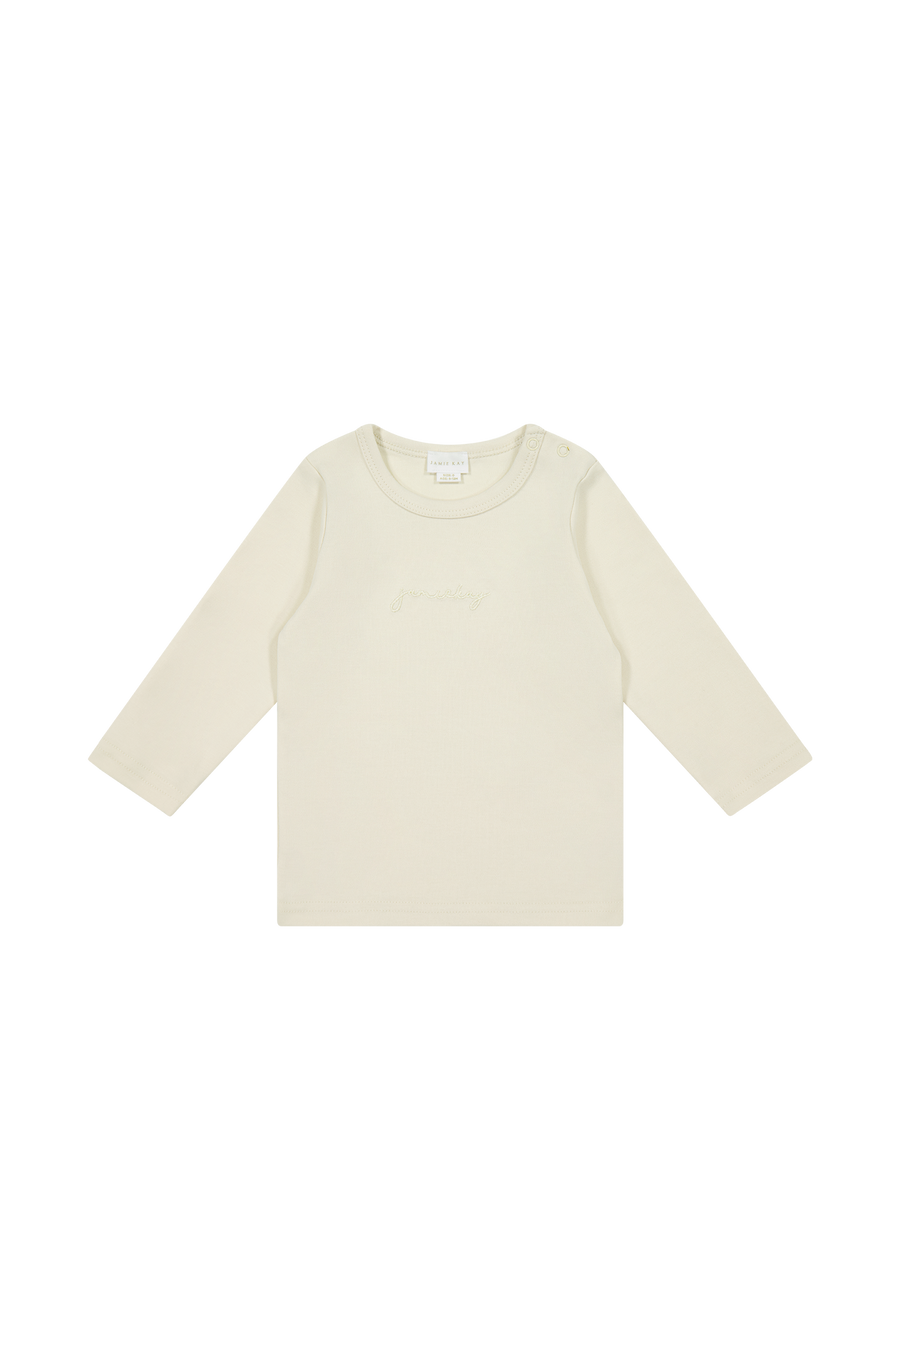 Pima Cotton Vinny Long Sleeve Top - Samoyed Childrens Top from Jamie Kay NZ